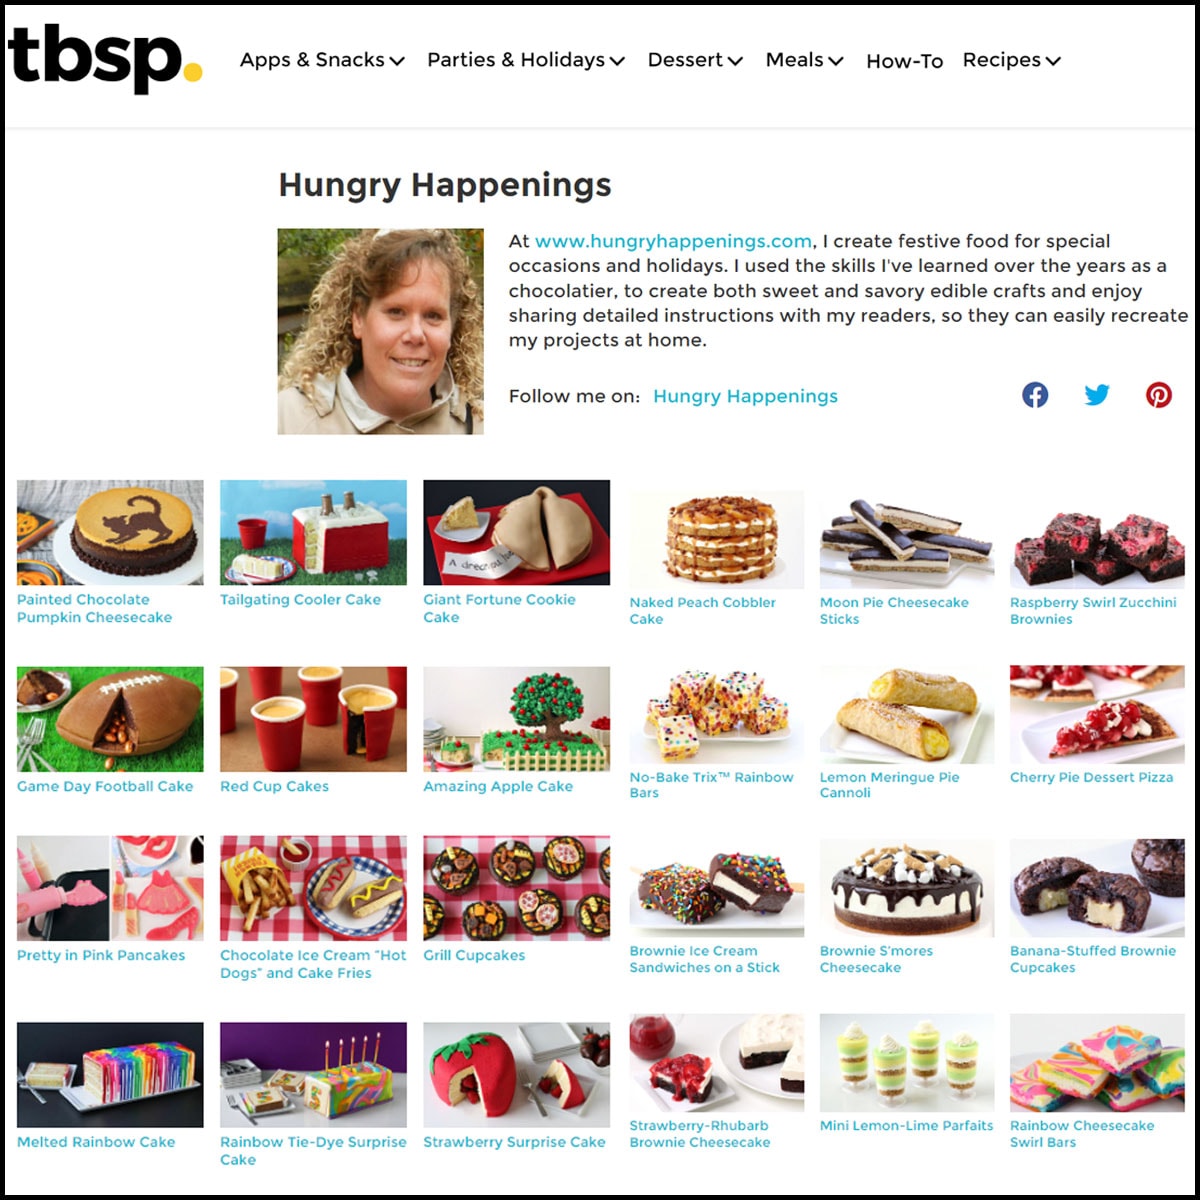 Hungry Happenings recipes featured on Tablespoon dot com